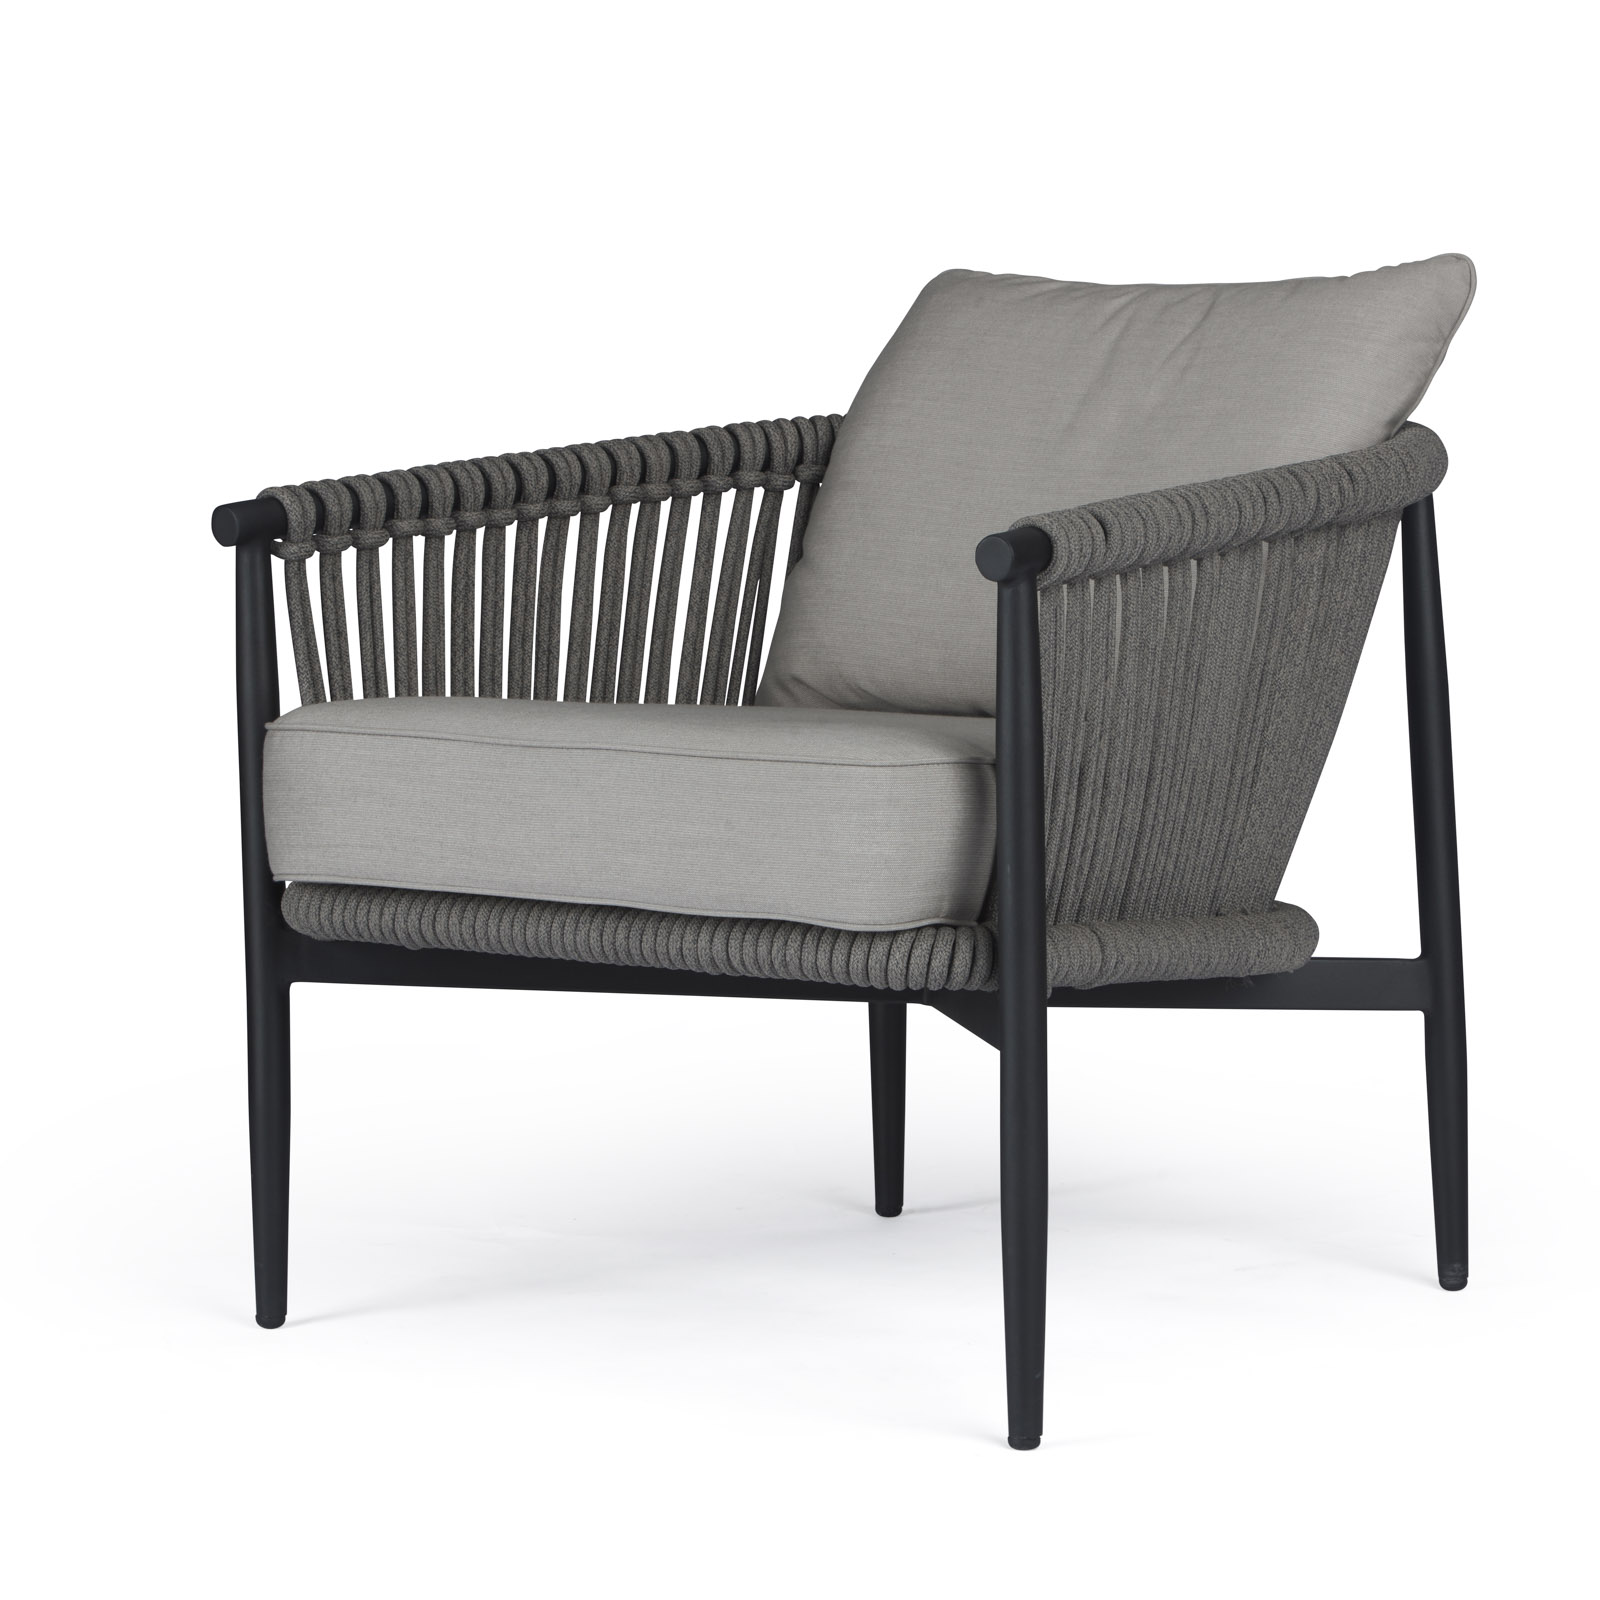 Archi Outdoor Rope Relaxing Club Chair | Patio Furniture | Teak